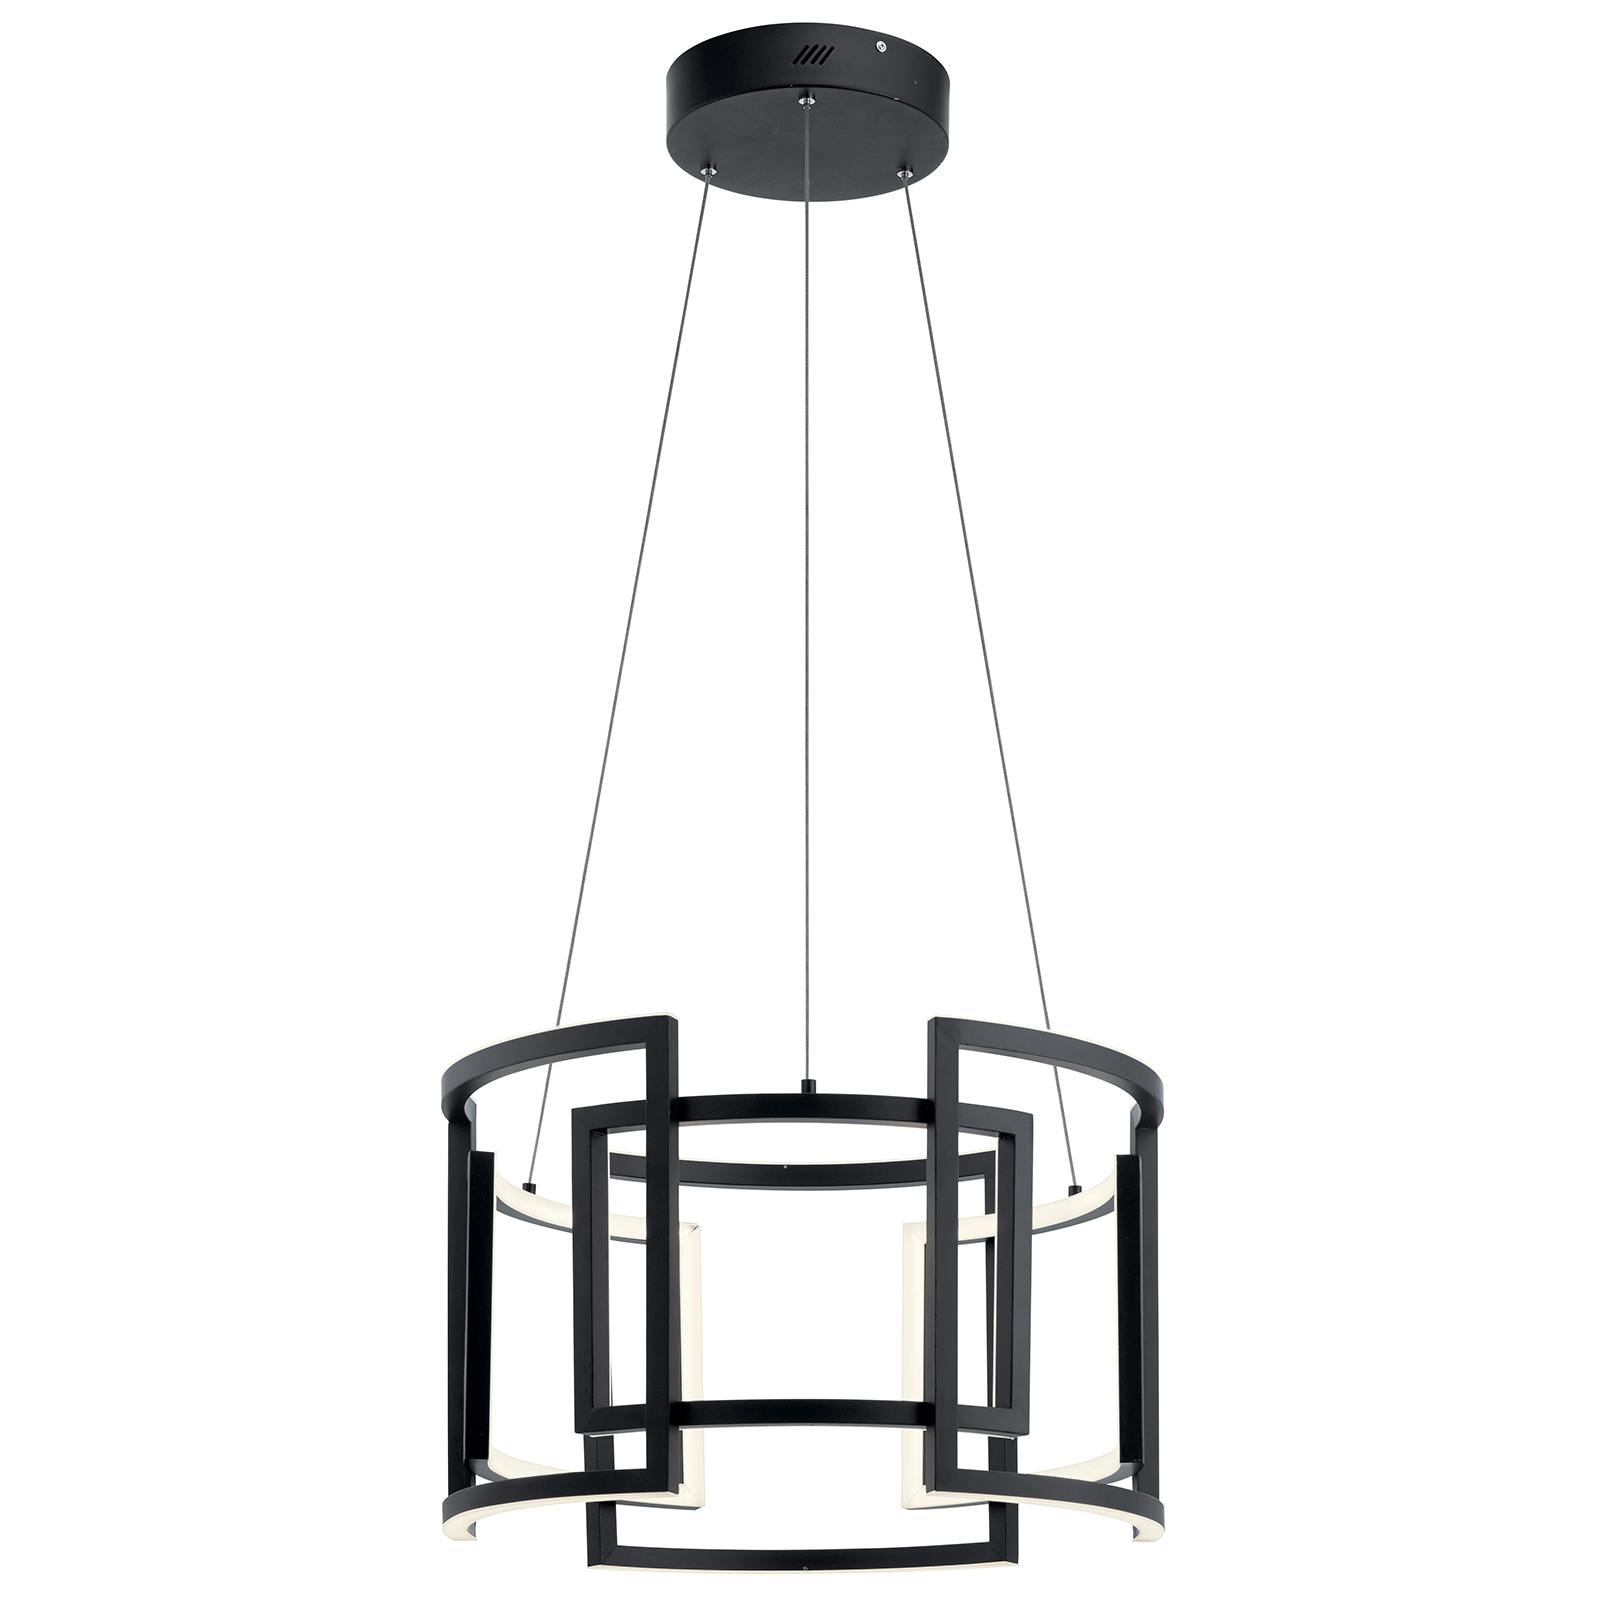 Profile view of the Melko™ 23.5" LED Round Pendant Black on a white background